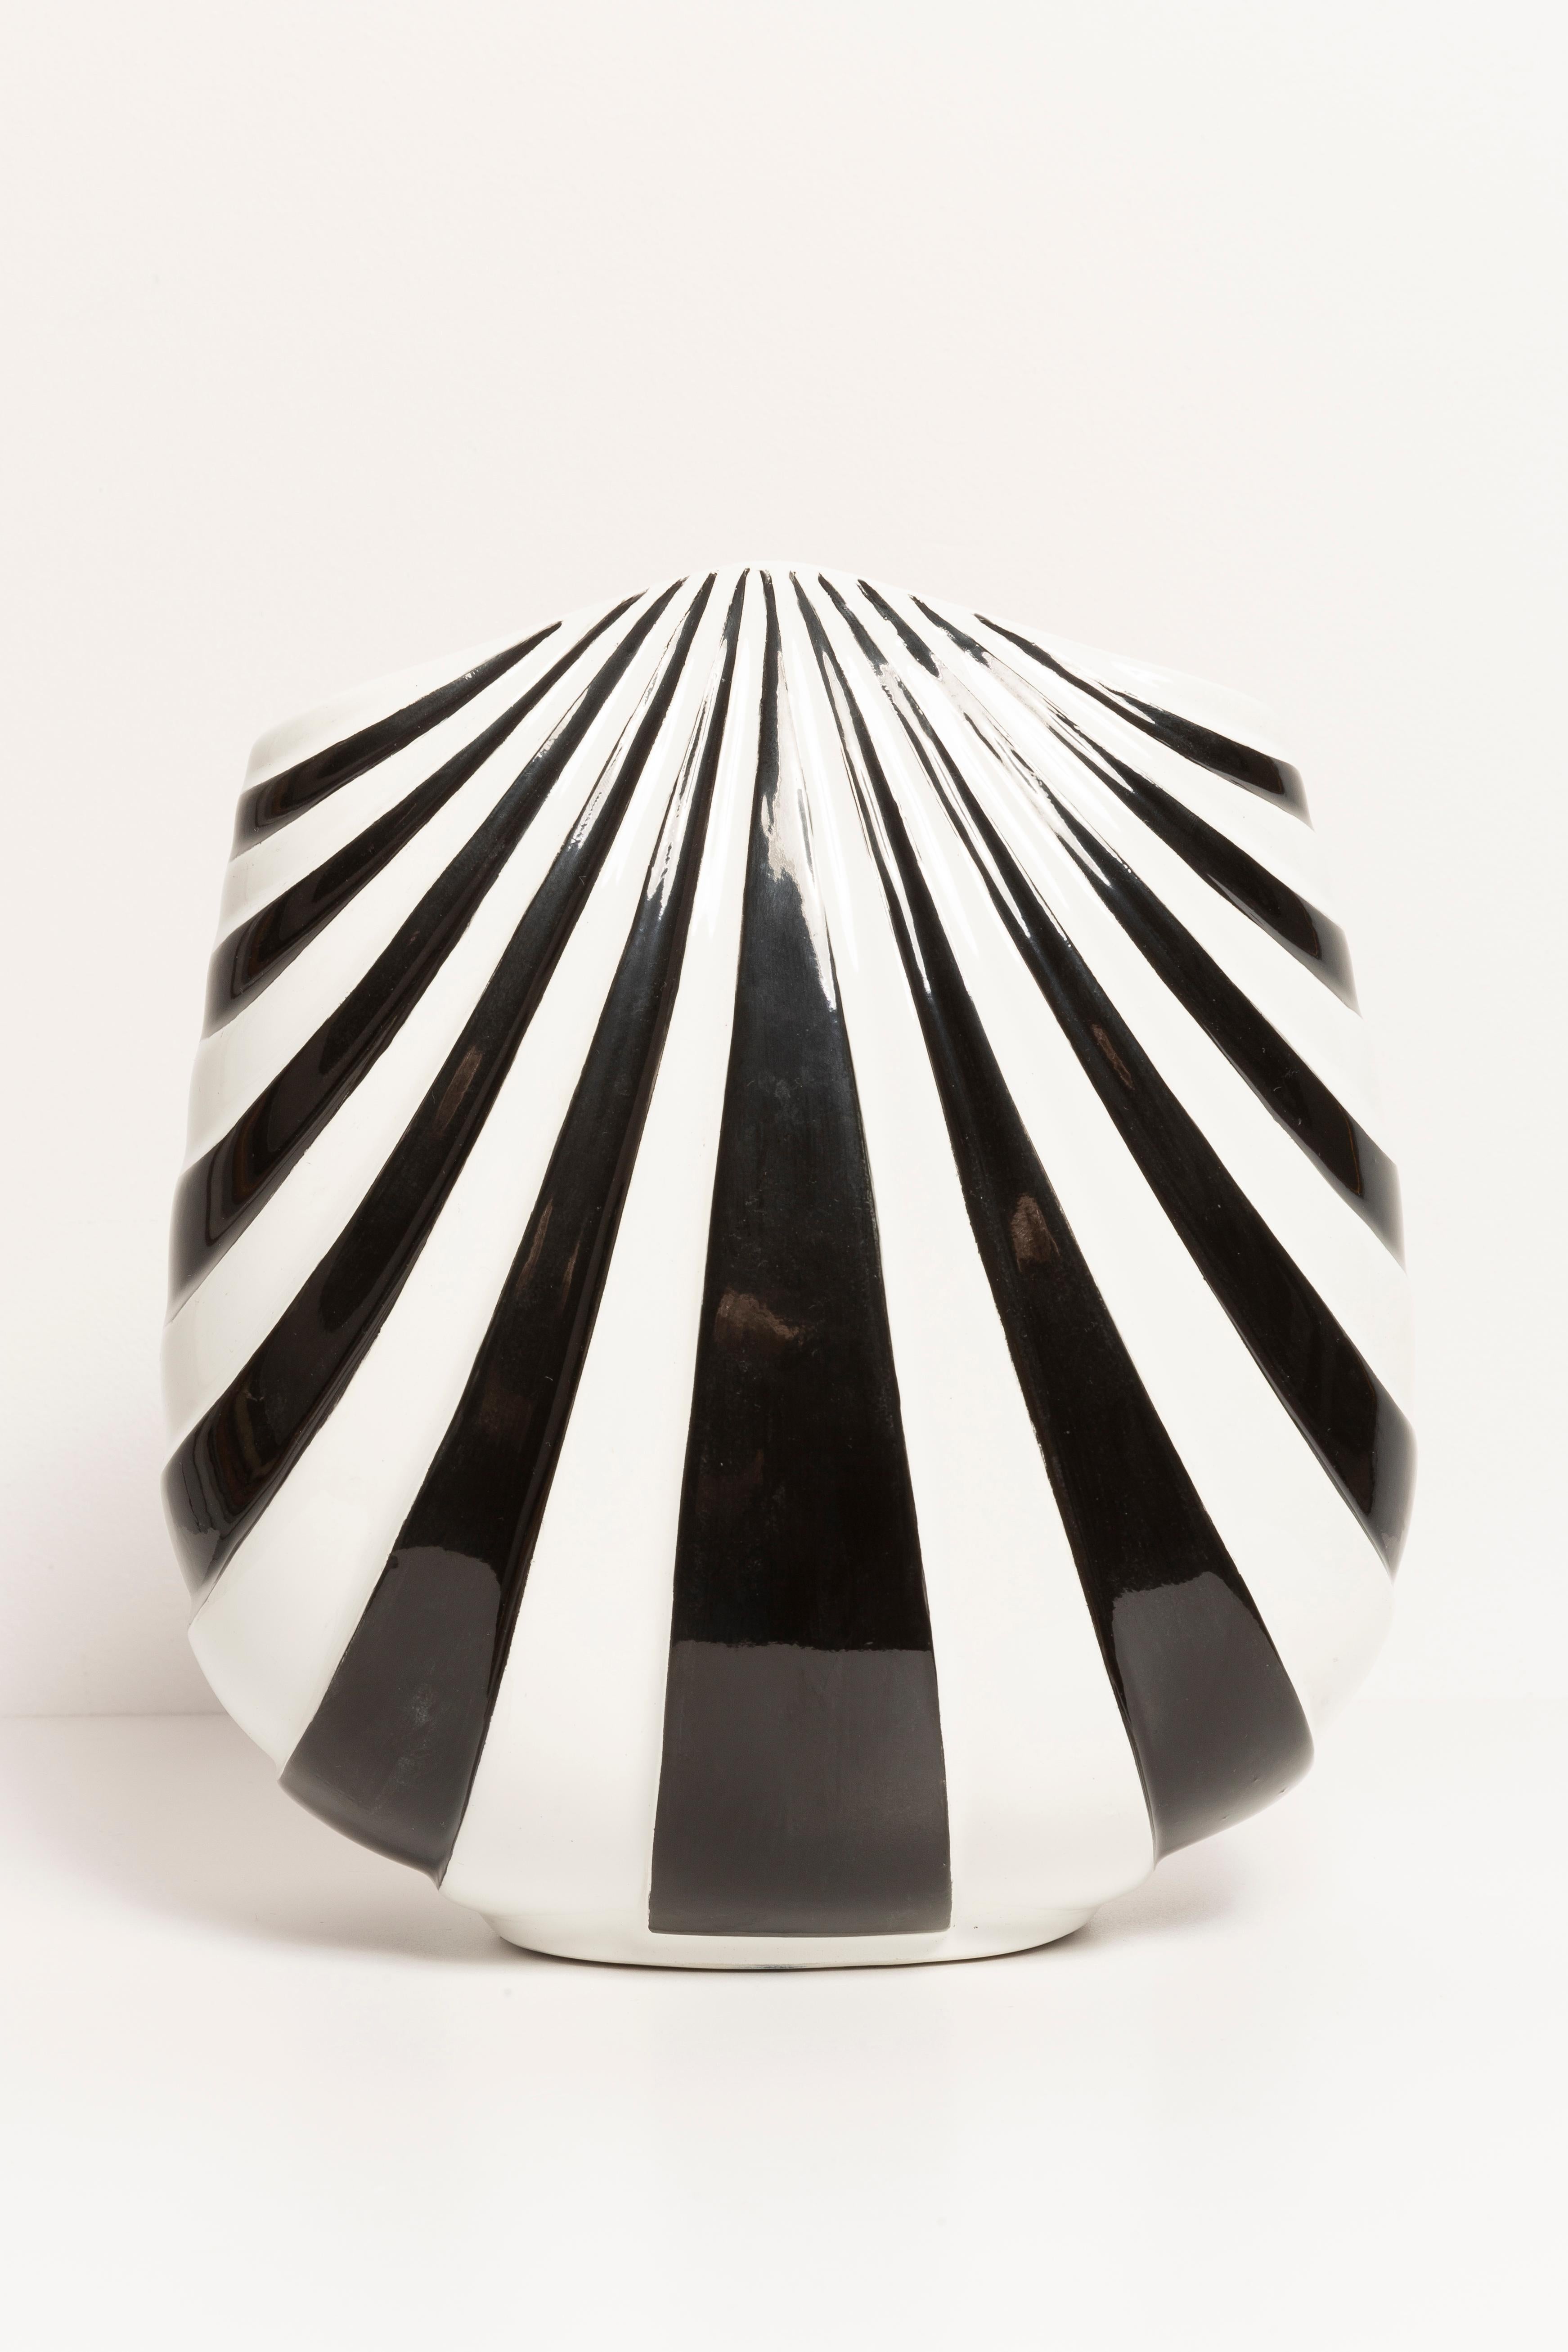 Czech Unique Hand Painted Black and White Vase, 20th Century, Europe, 2000s For Sale